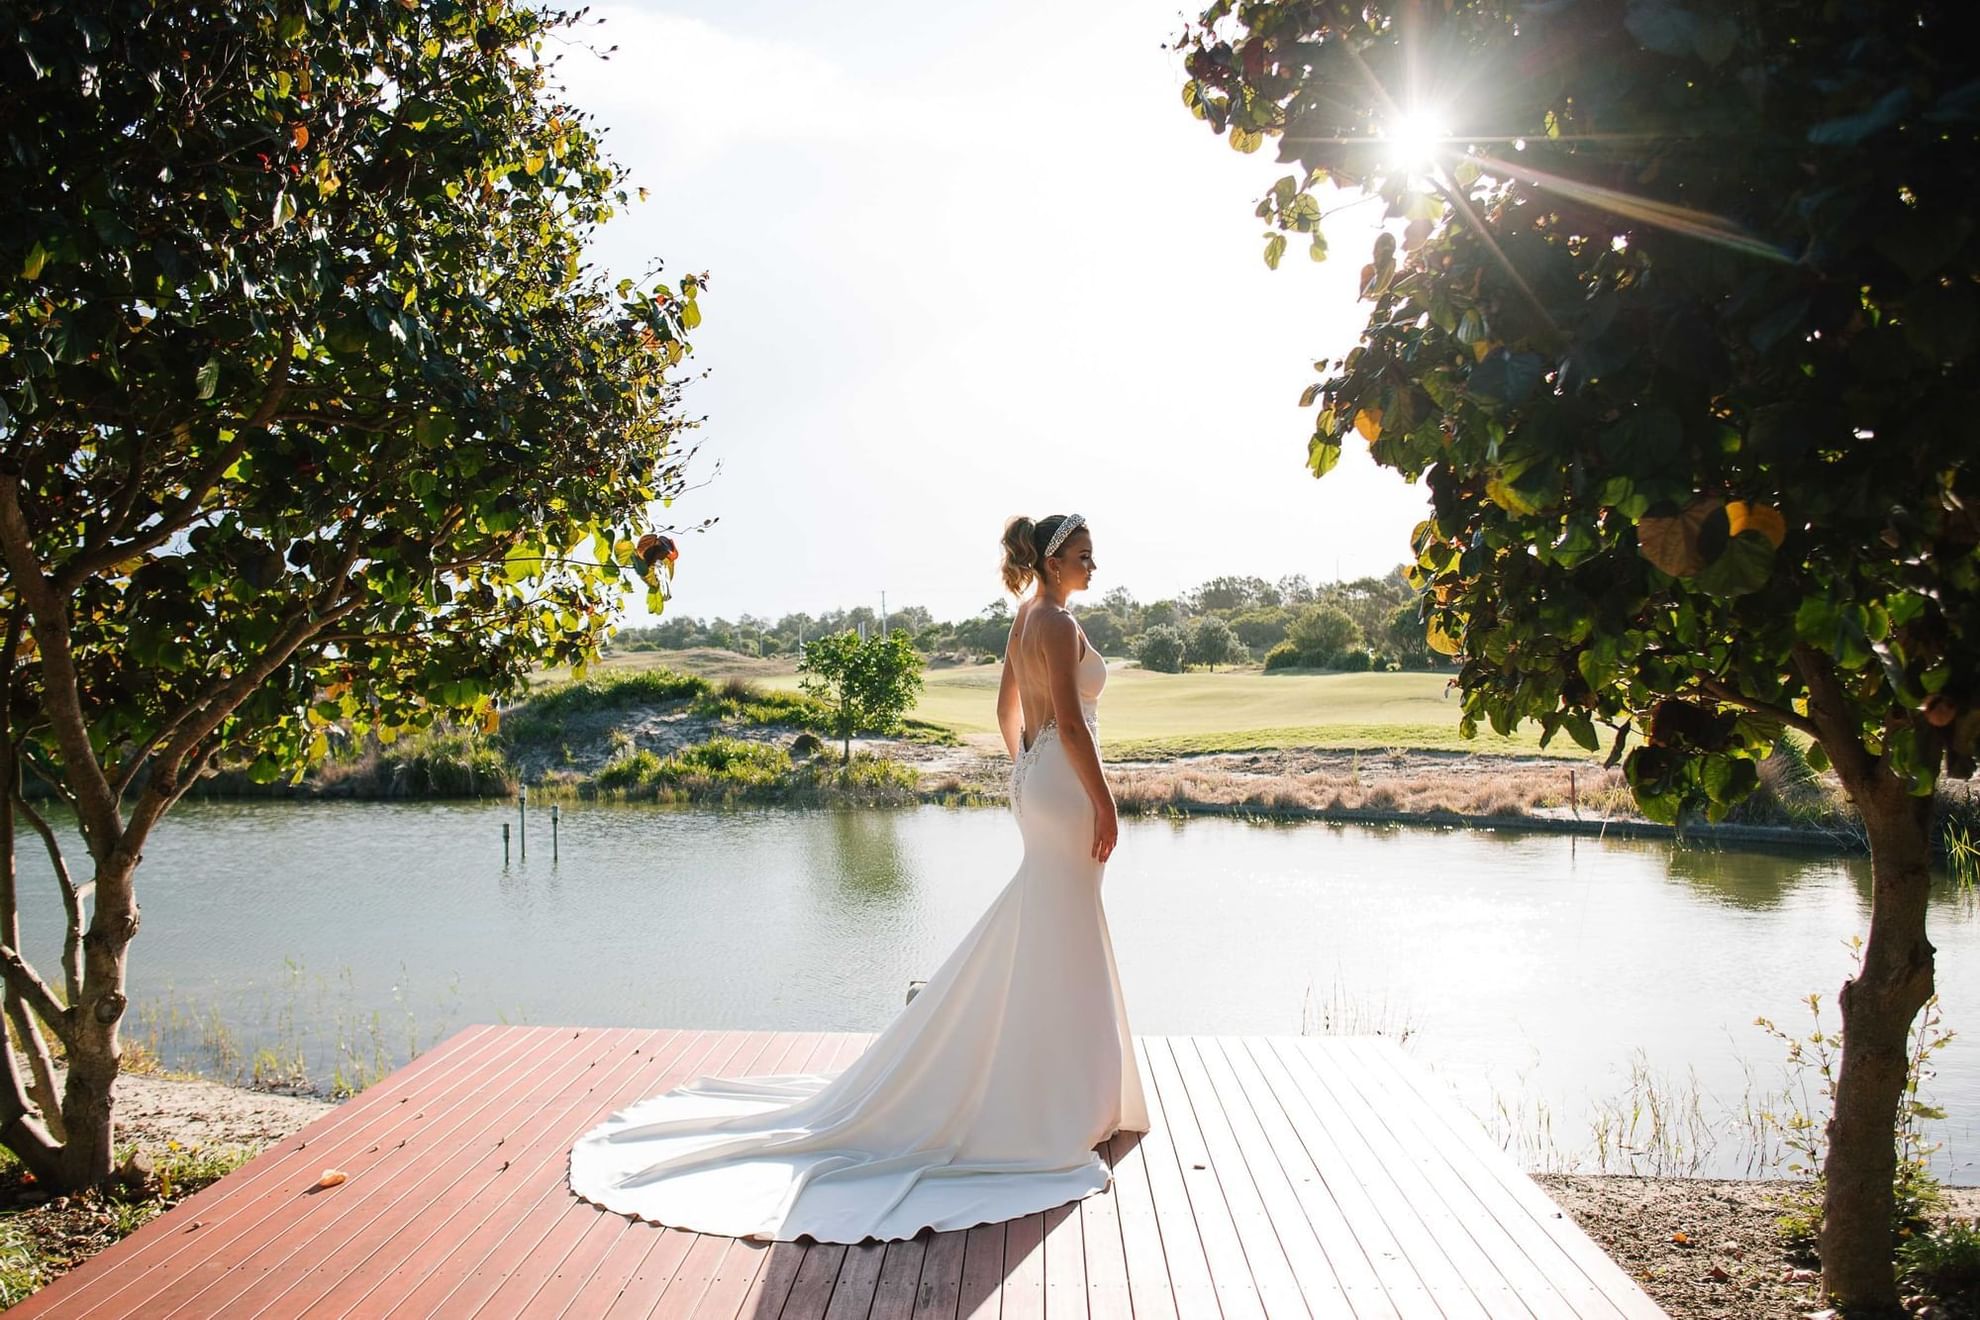 Beautiful wedding views next to lake and golf course